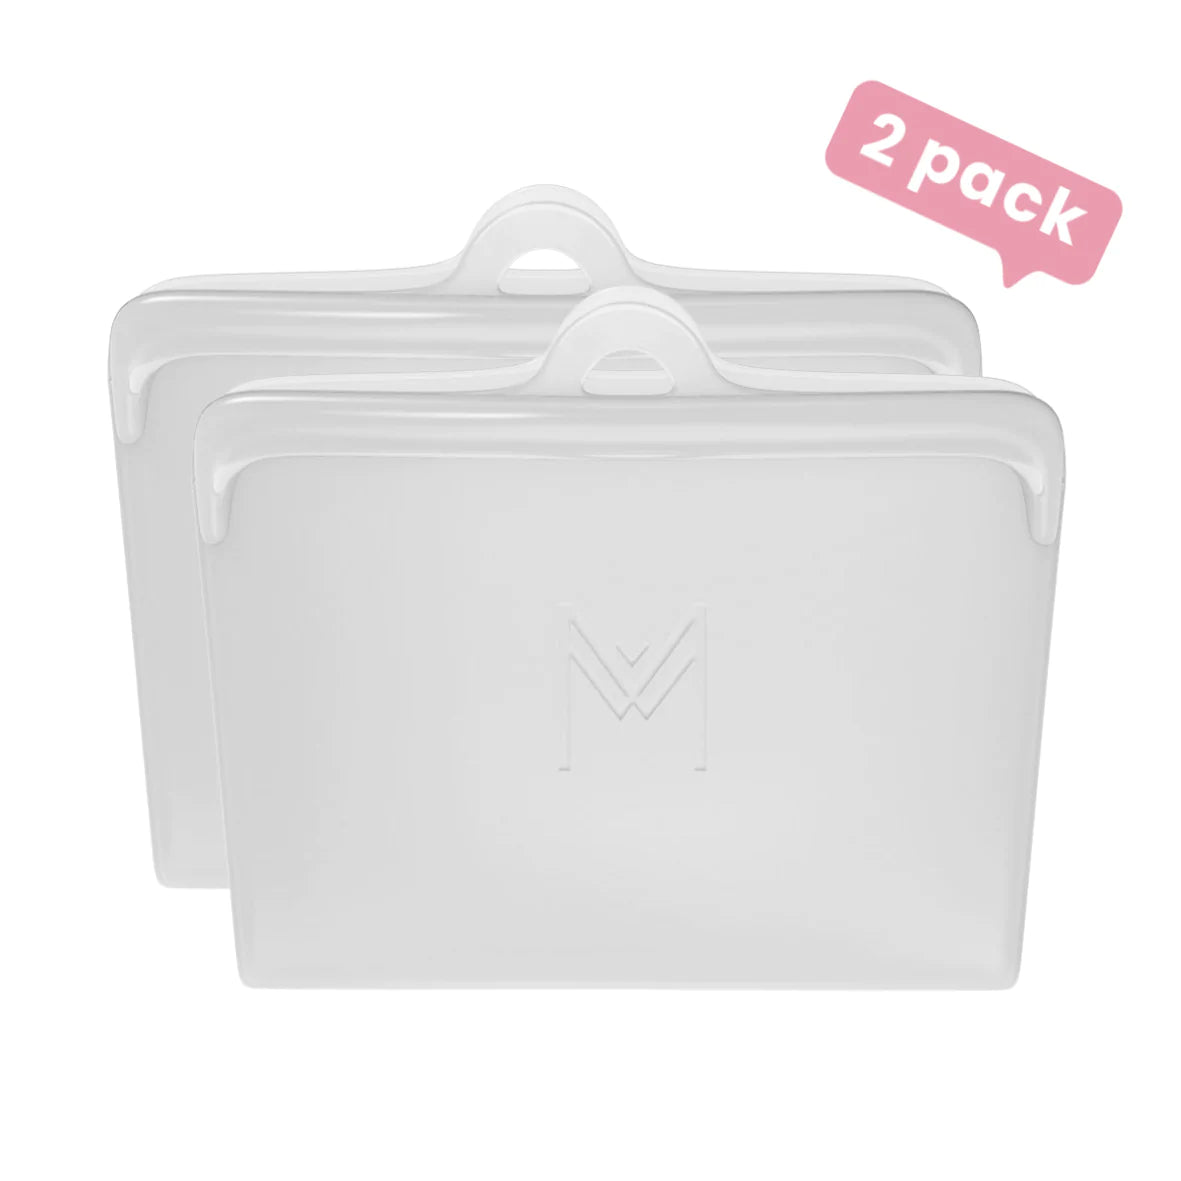 Montii Co Pack & Snack Silicone Food Pouch 400ml in Clear | 25% OFF | Children of the Wild